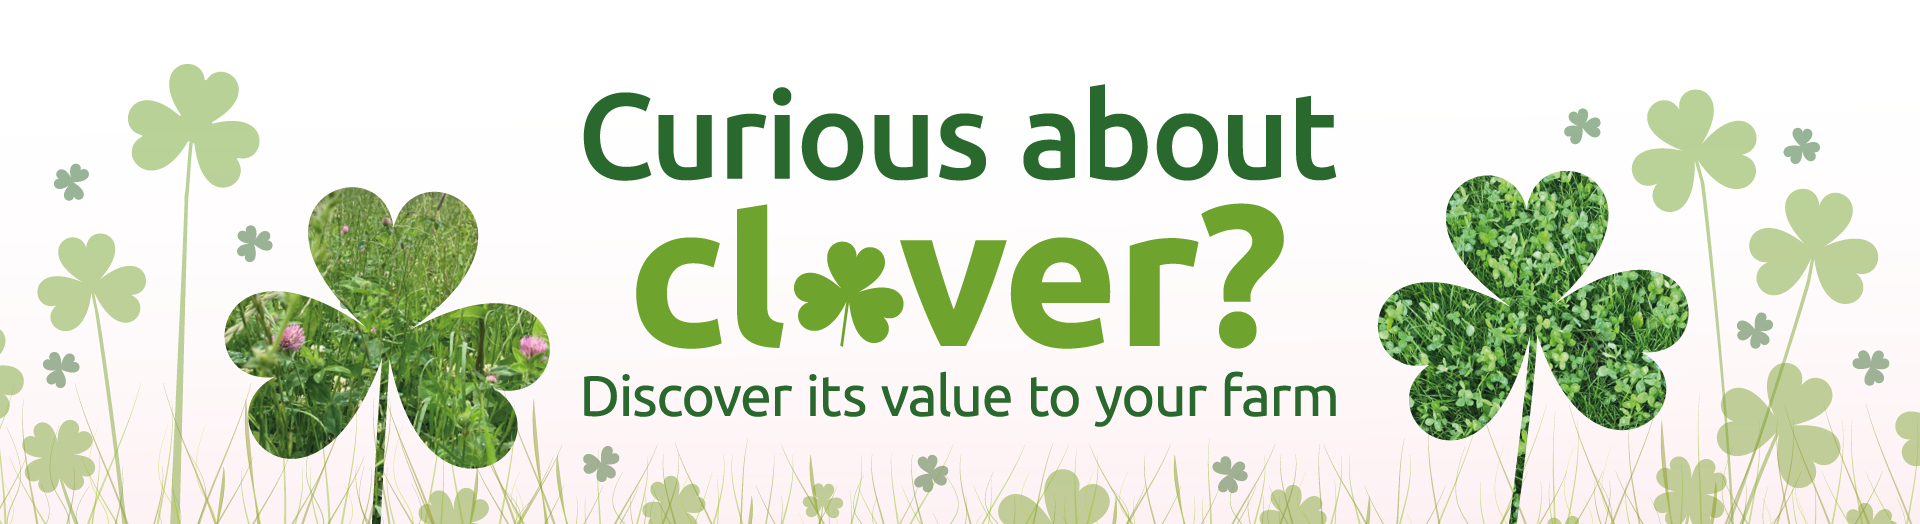 CURIOUS ABOUT CLOVER BANNER IMAGE